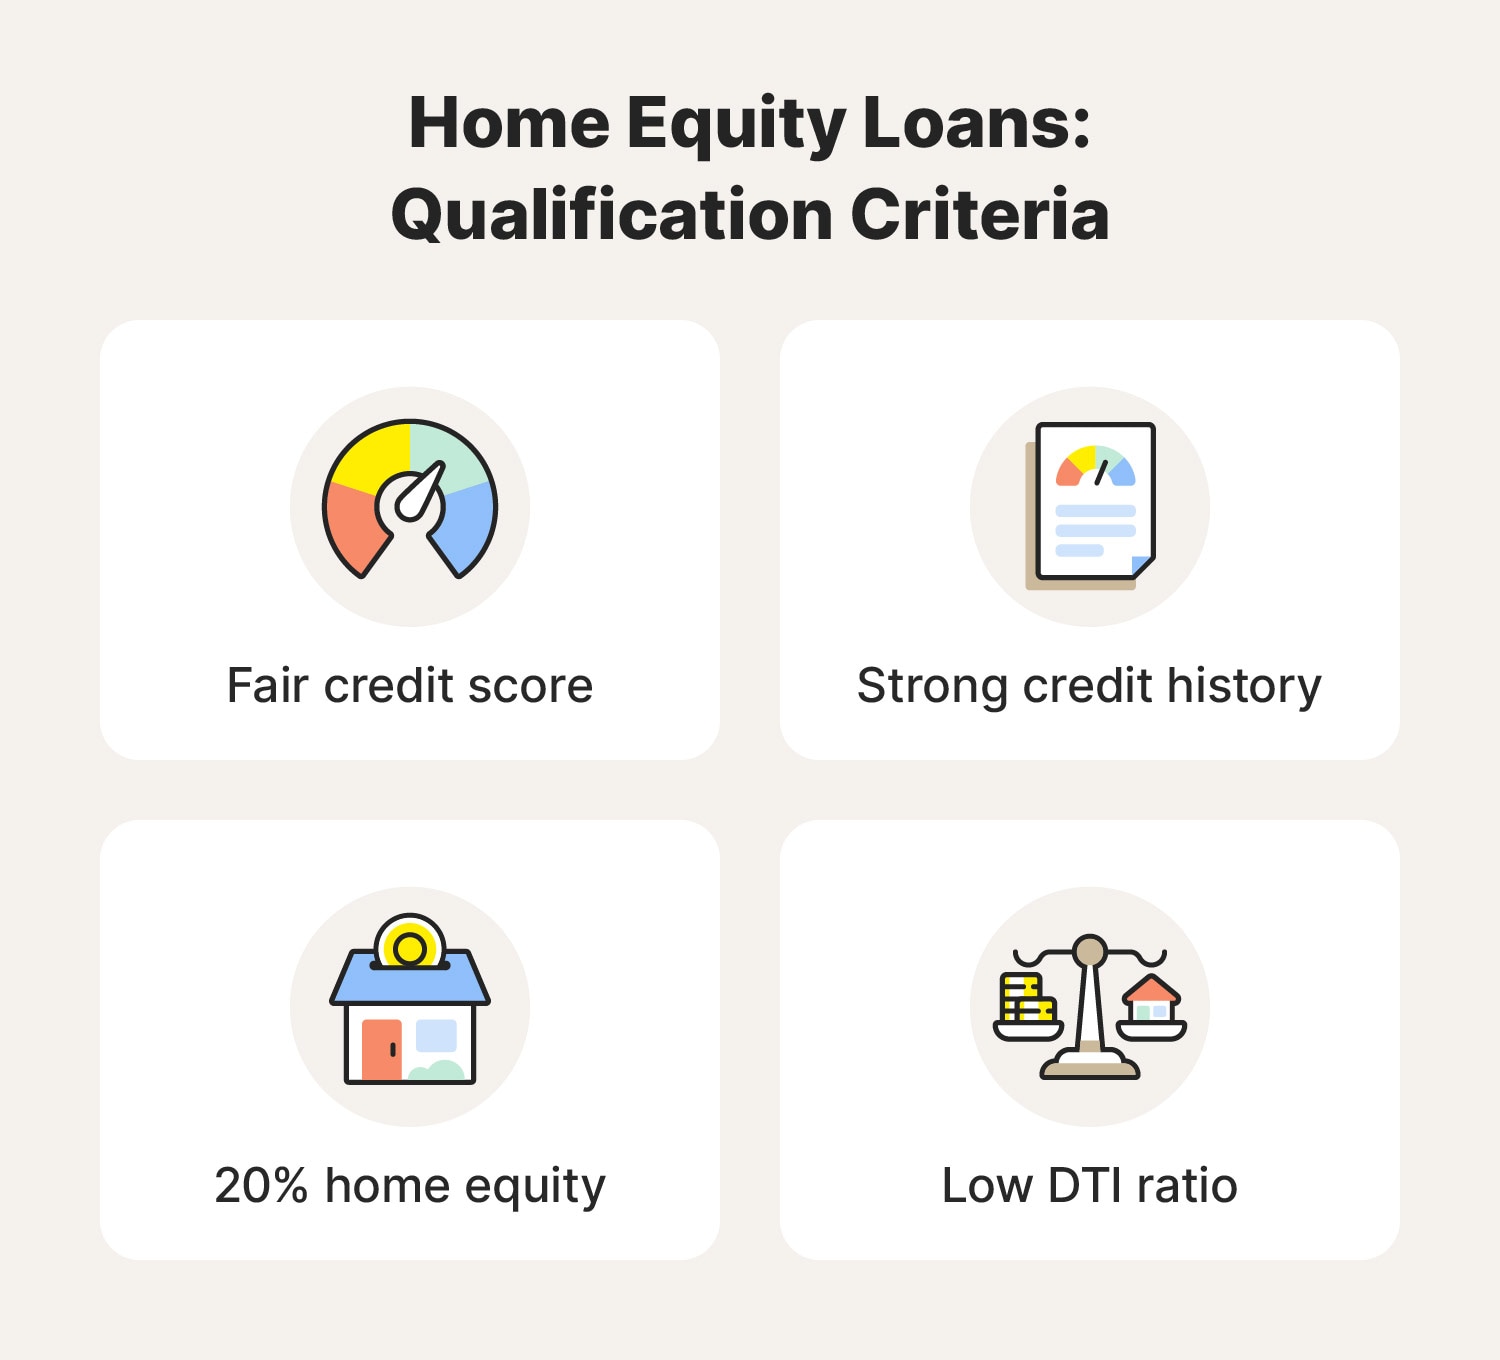 The qualification criteria to get approved for a home equity loan. 